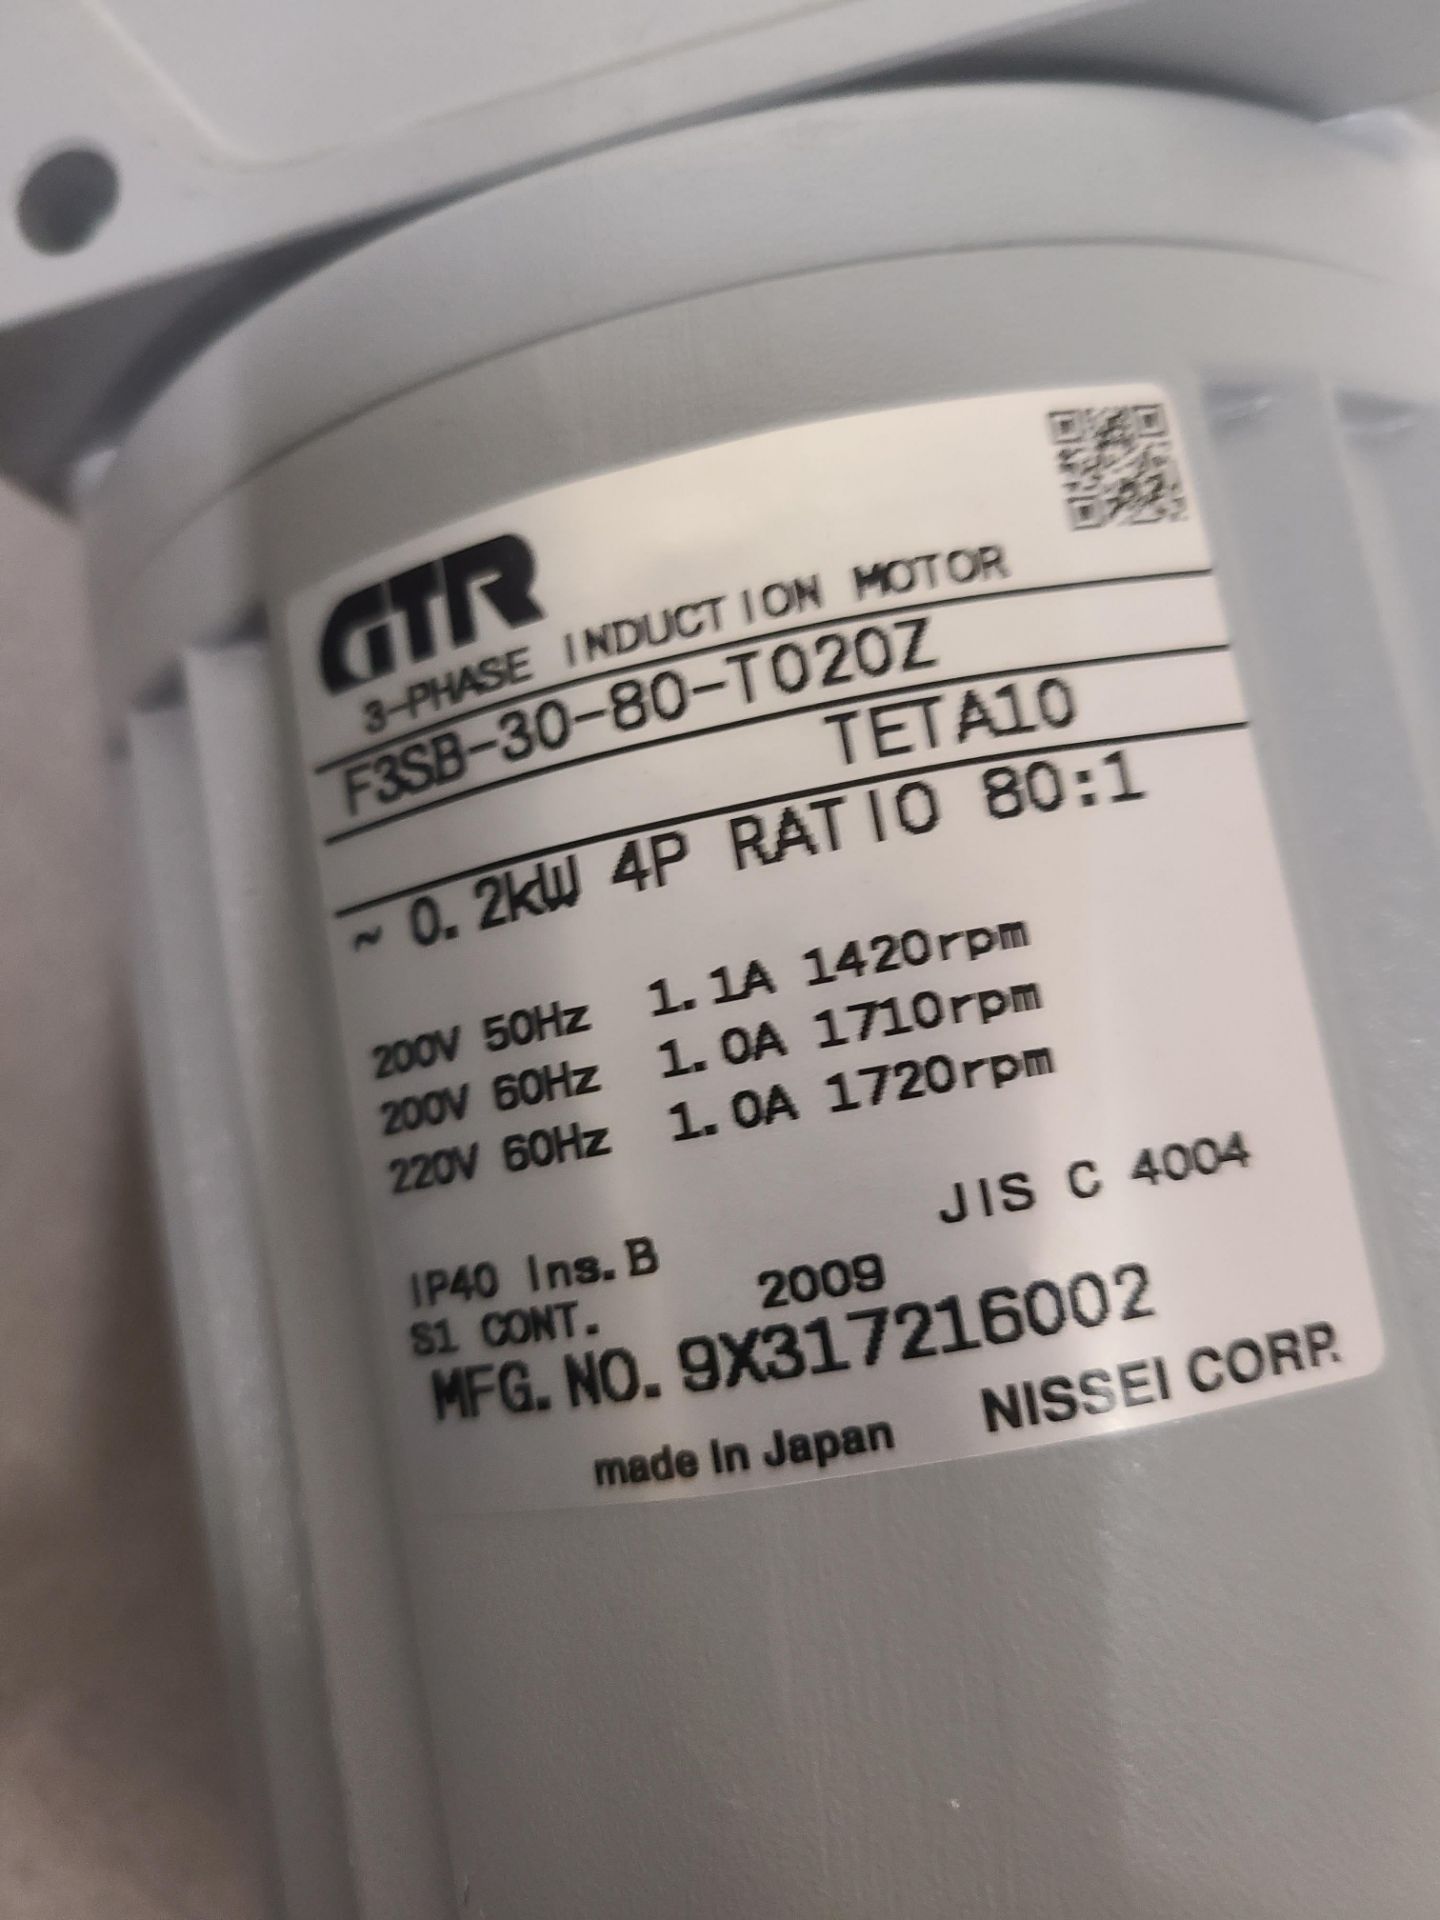 (2) GTR 3-PHASE INDUCTION MOTOR: M-F3SB-30-80-T0202-- (432 COUNCIL DRIVE FORT WAYNE INDIANA) - Image 2 of 2